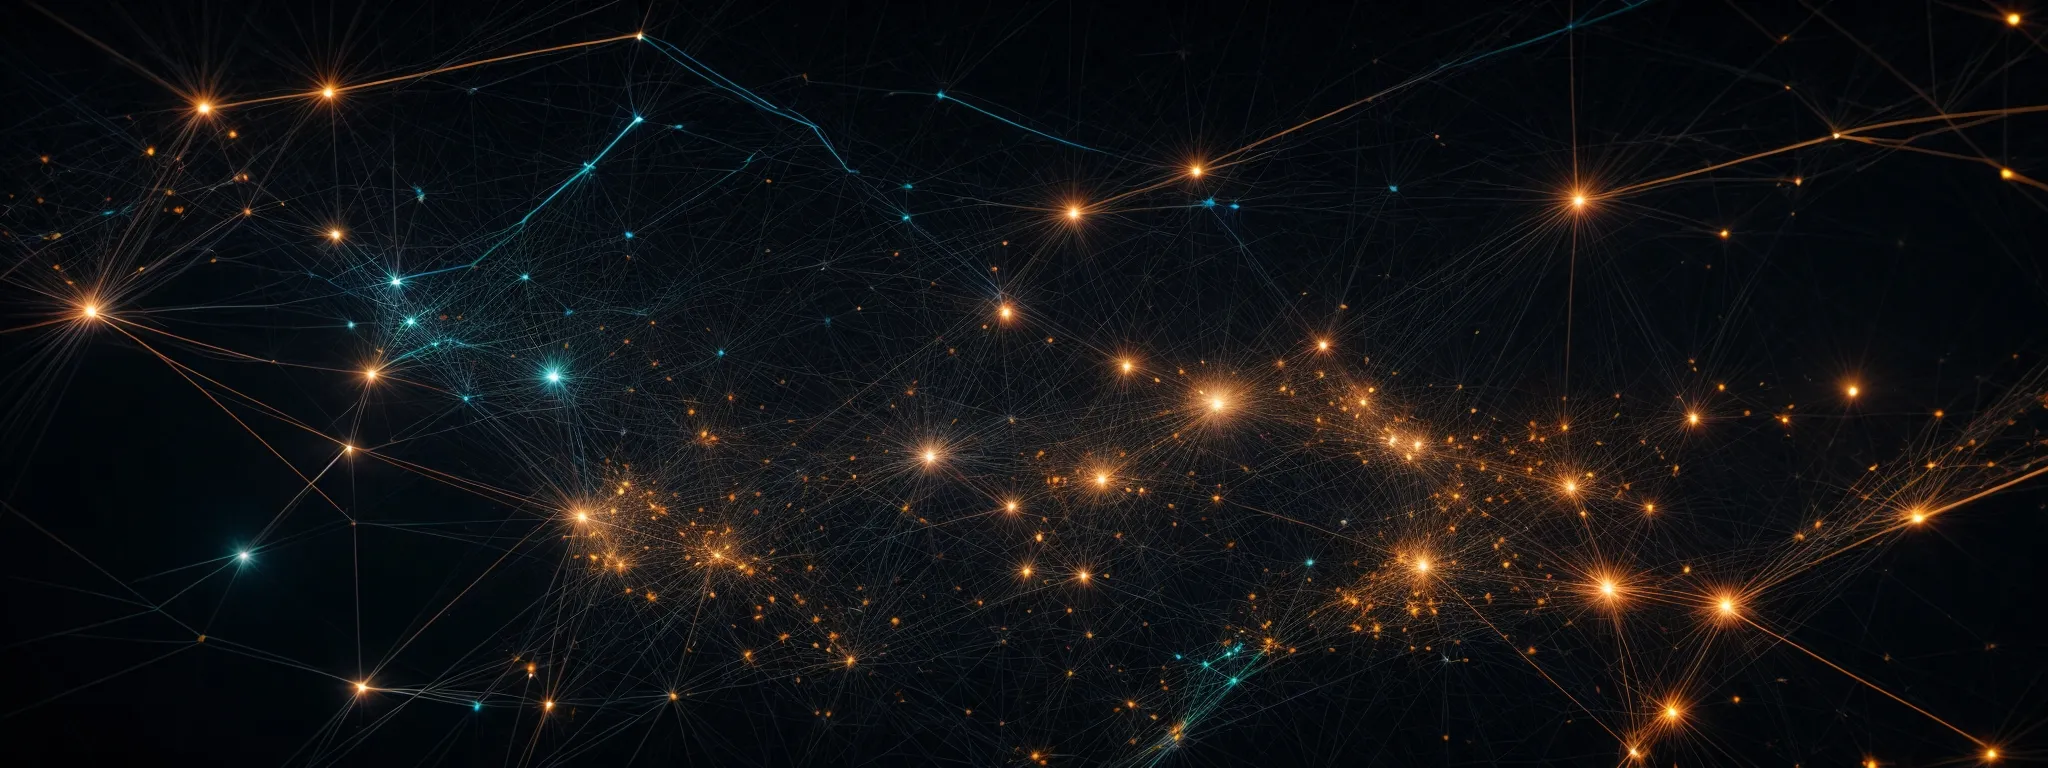 a panoramic view of multiple glowing network nodes interconnected with pulsing lines against a dark backdrop, symbolizing a thriving digital ecosystem.